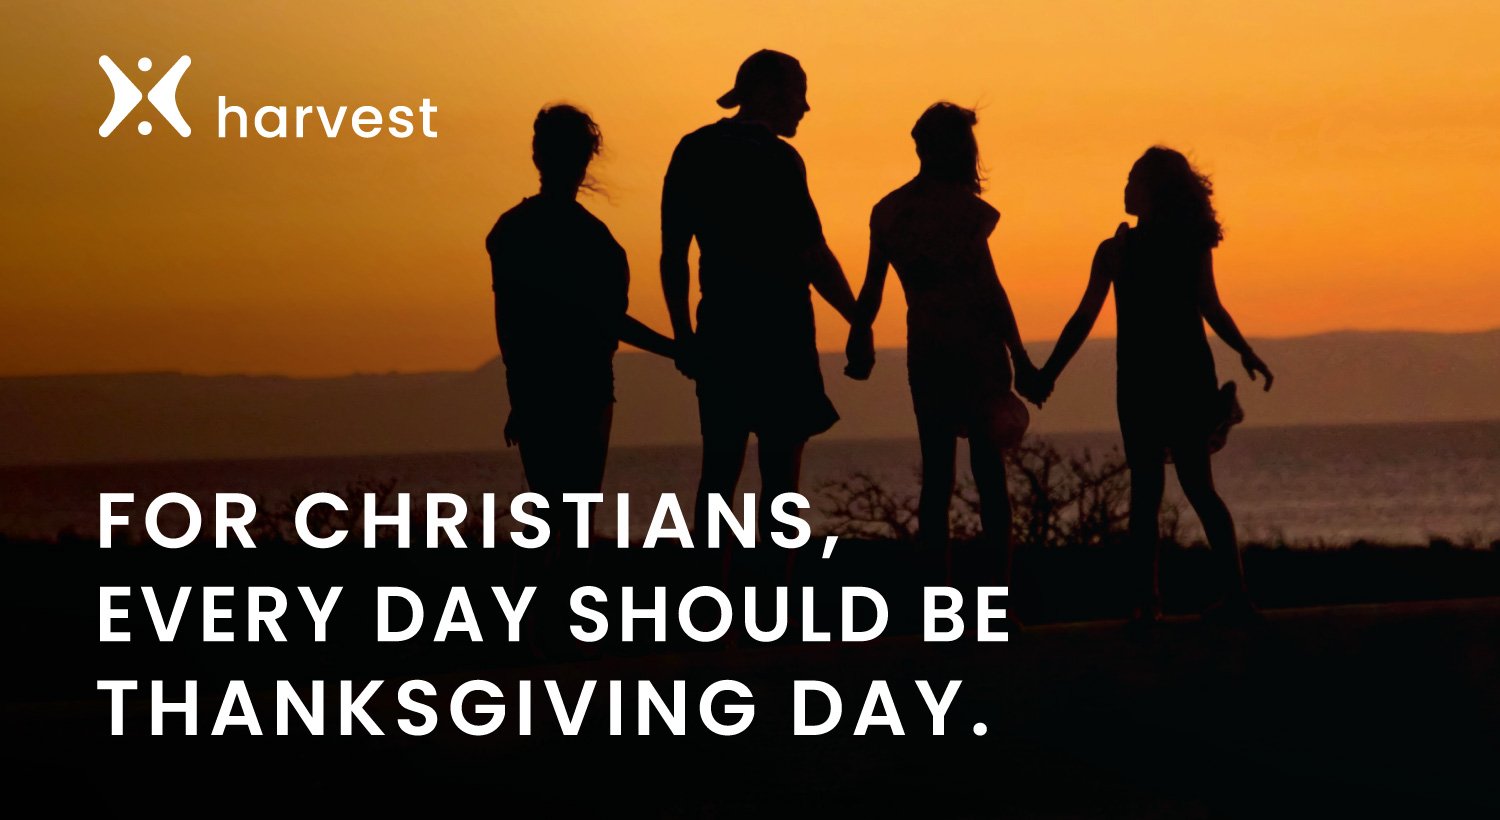 For Christians, every day should be Thanksgiving Day.